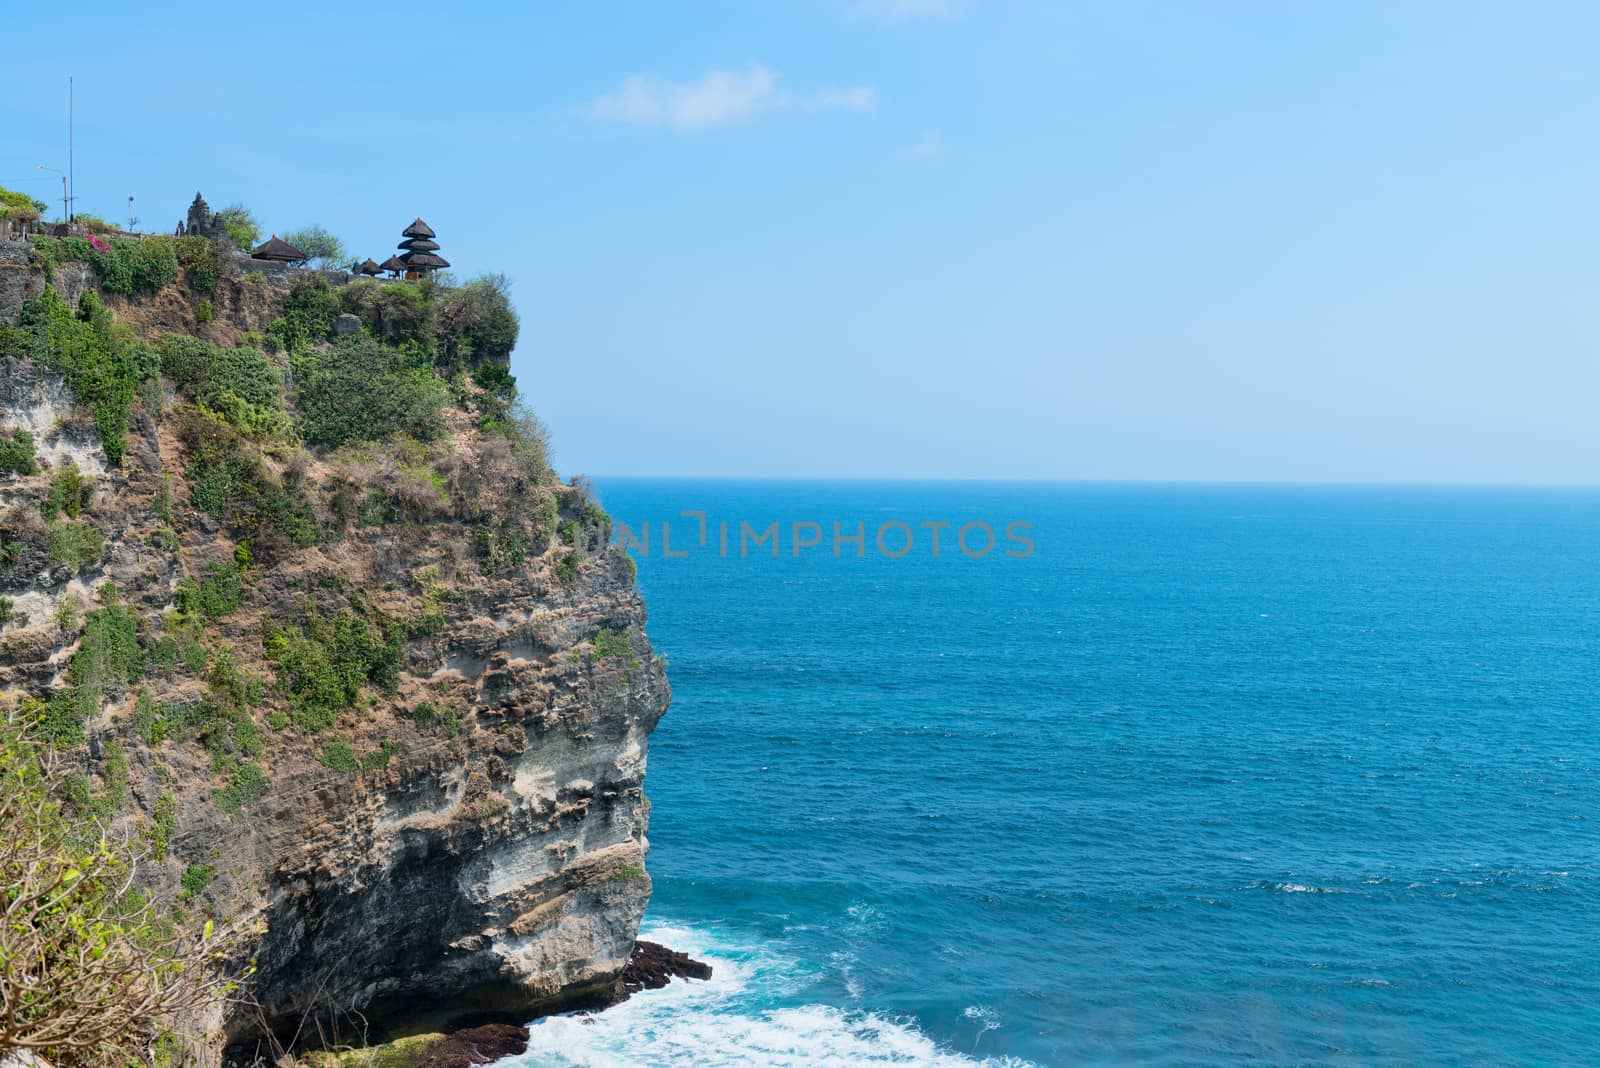 balinese temple on rock above blue tropical sea by iryna_rasko